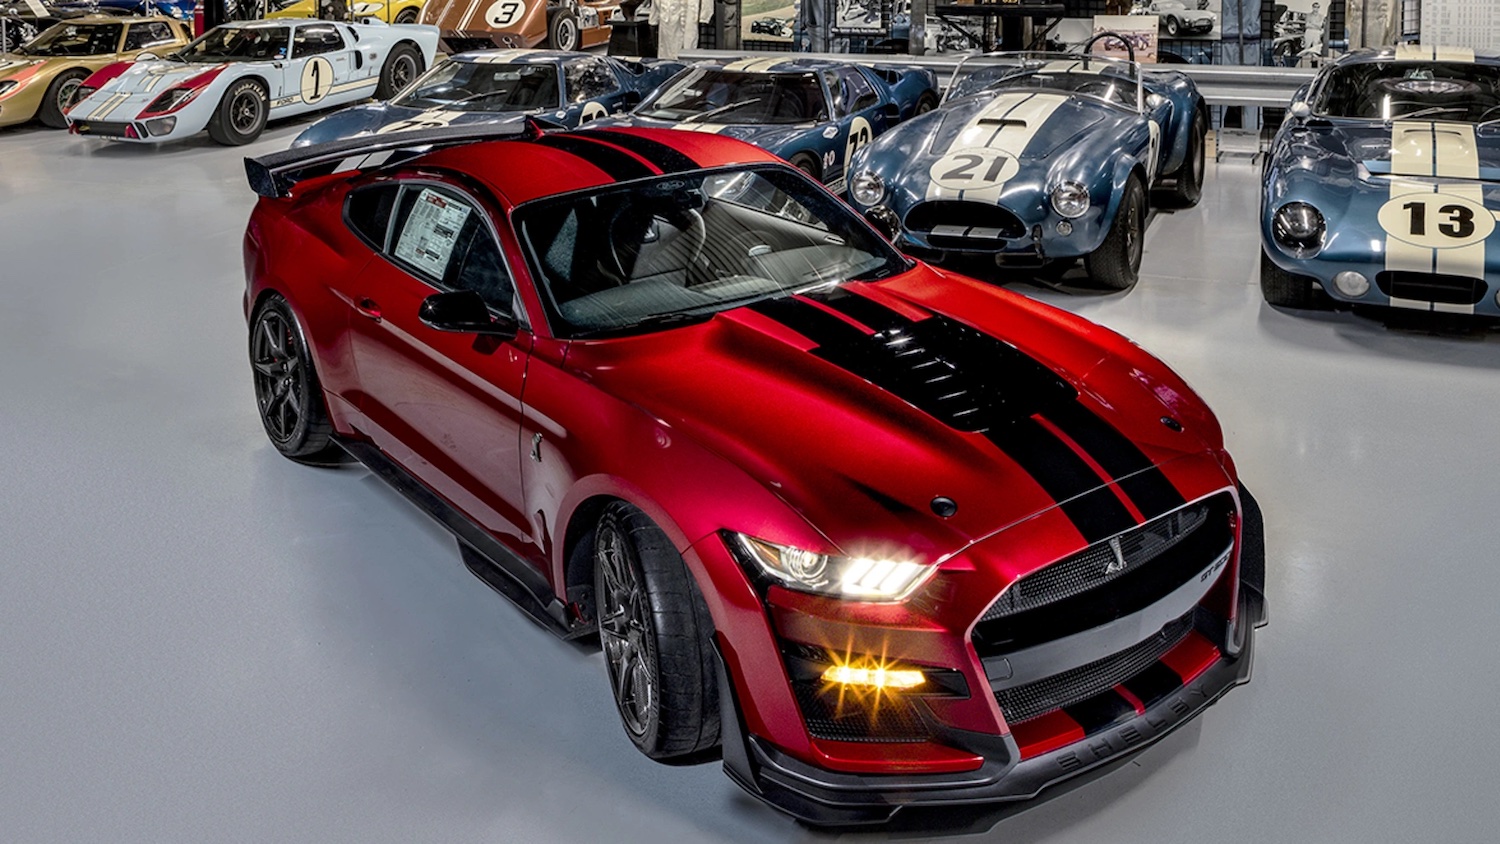 Win This Red Mustang Shelby GT500, Plus $25K